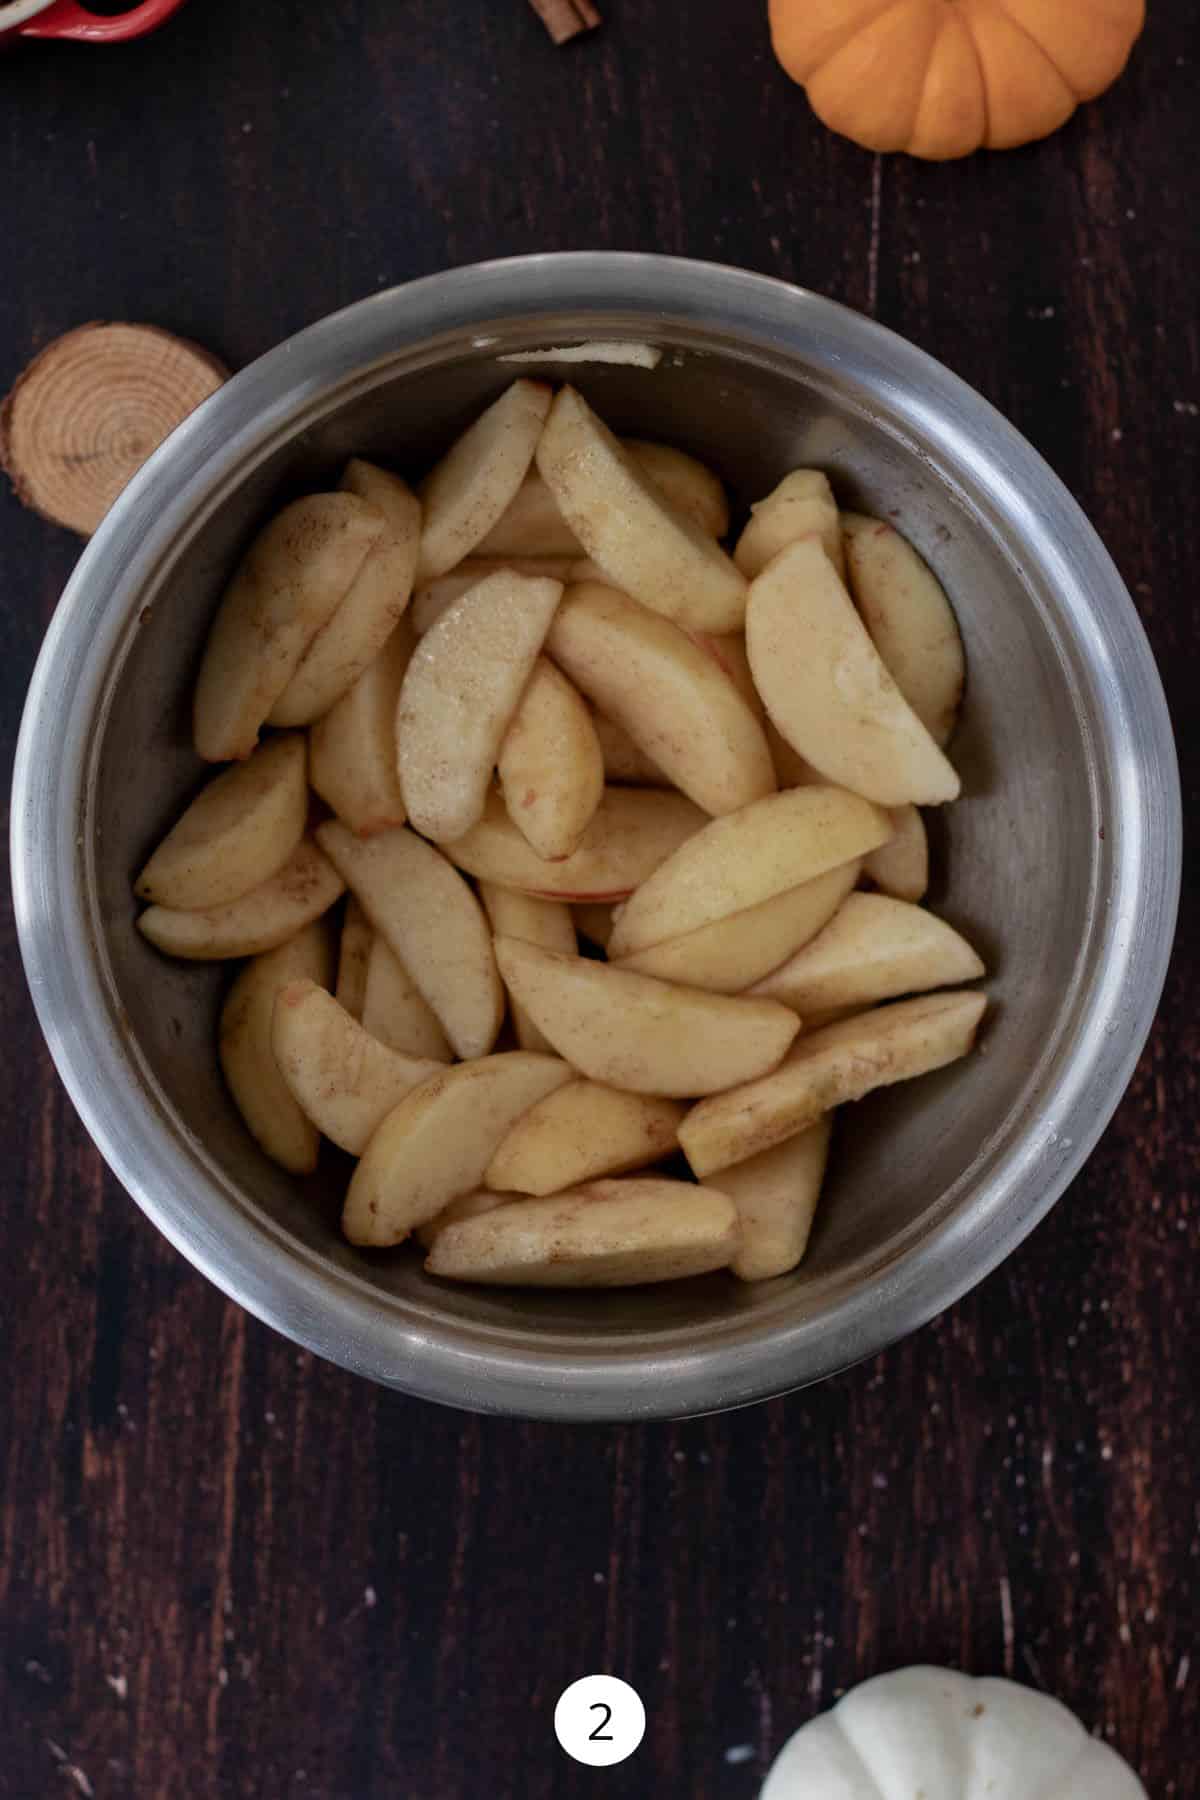 Peeled apples tossed with cinnamon in a small stainless-steel bowl.